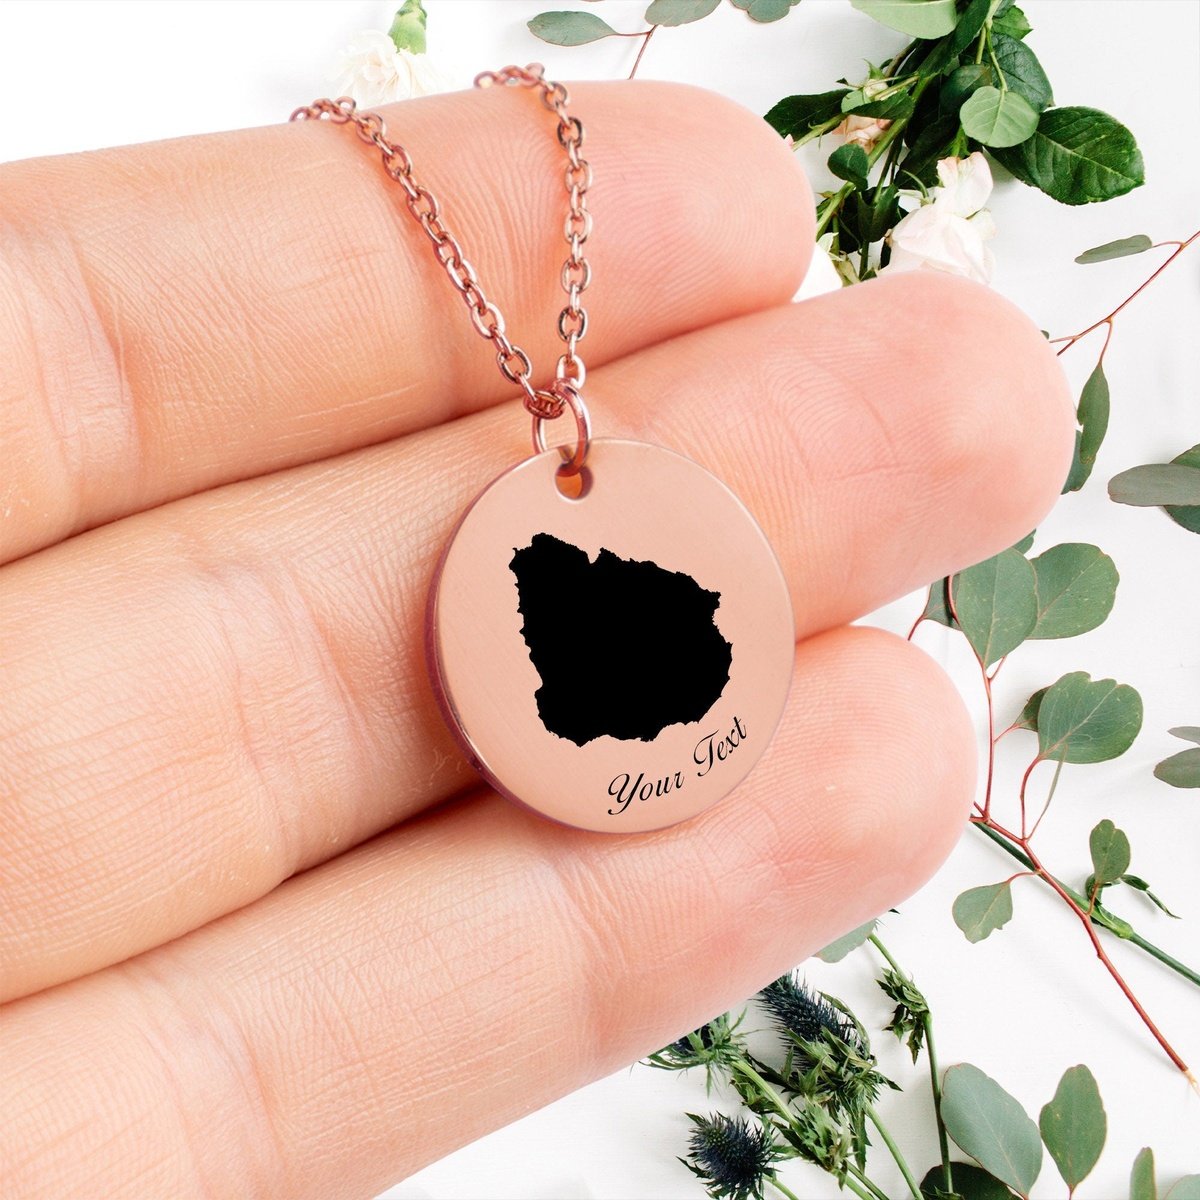 Uruguay Country Map Necklace, Your Name Necklace, Minimalist Necklace, Personalized Gift, Silver Necklace, Gift For Him Her